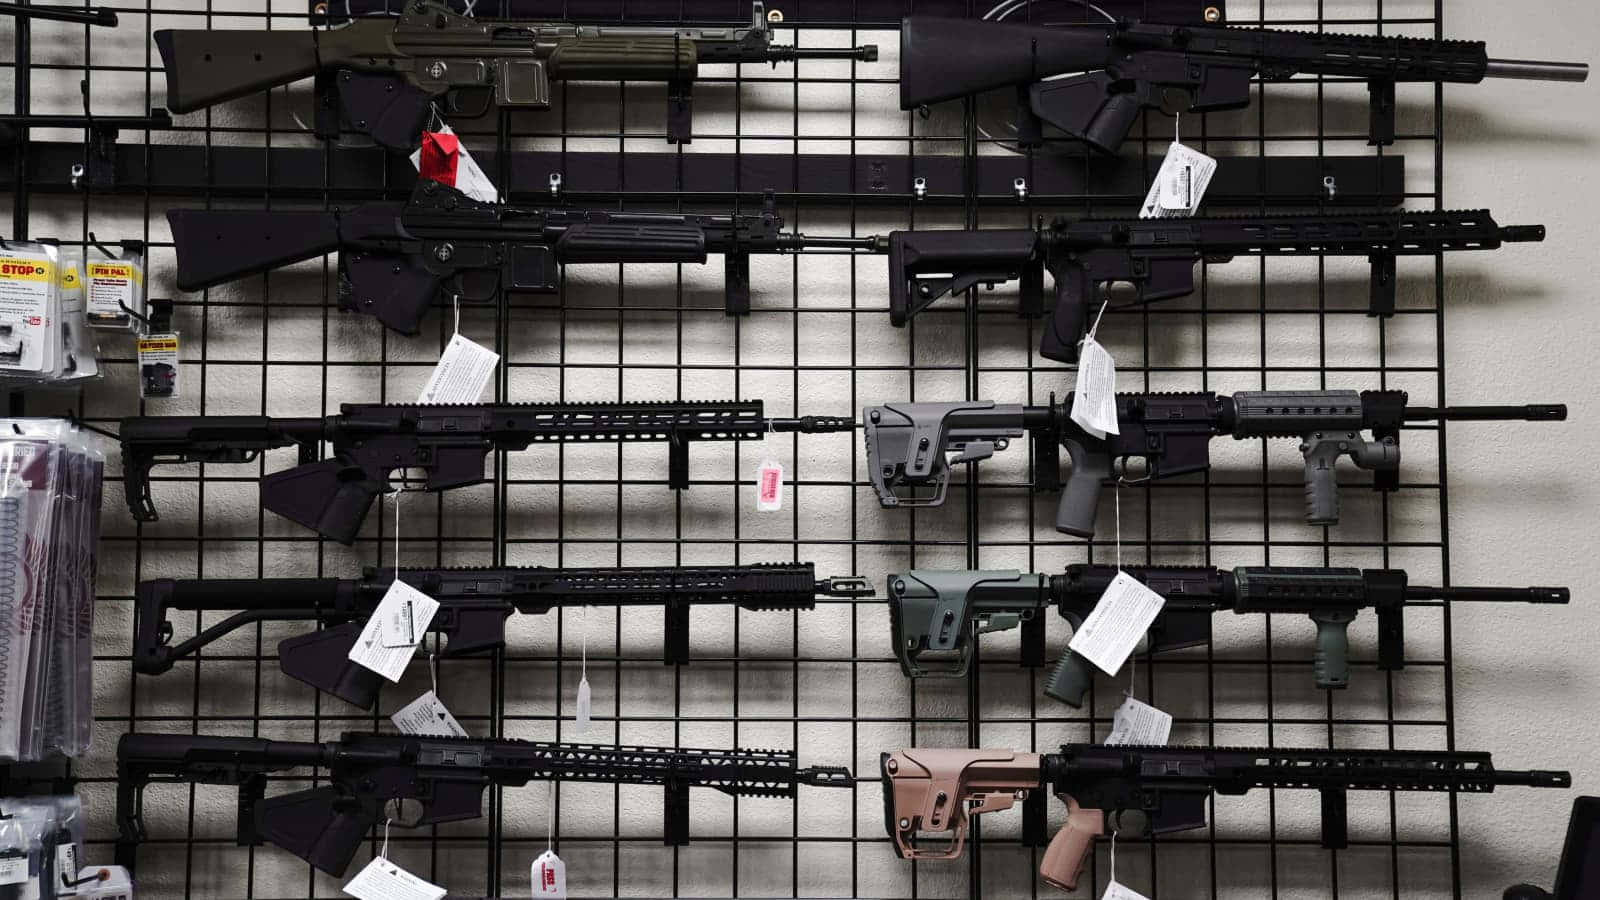 A Display Of Guns On Display In A Store